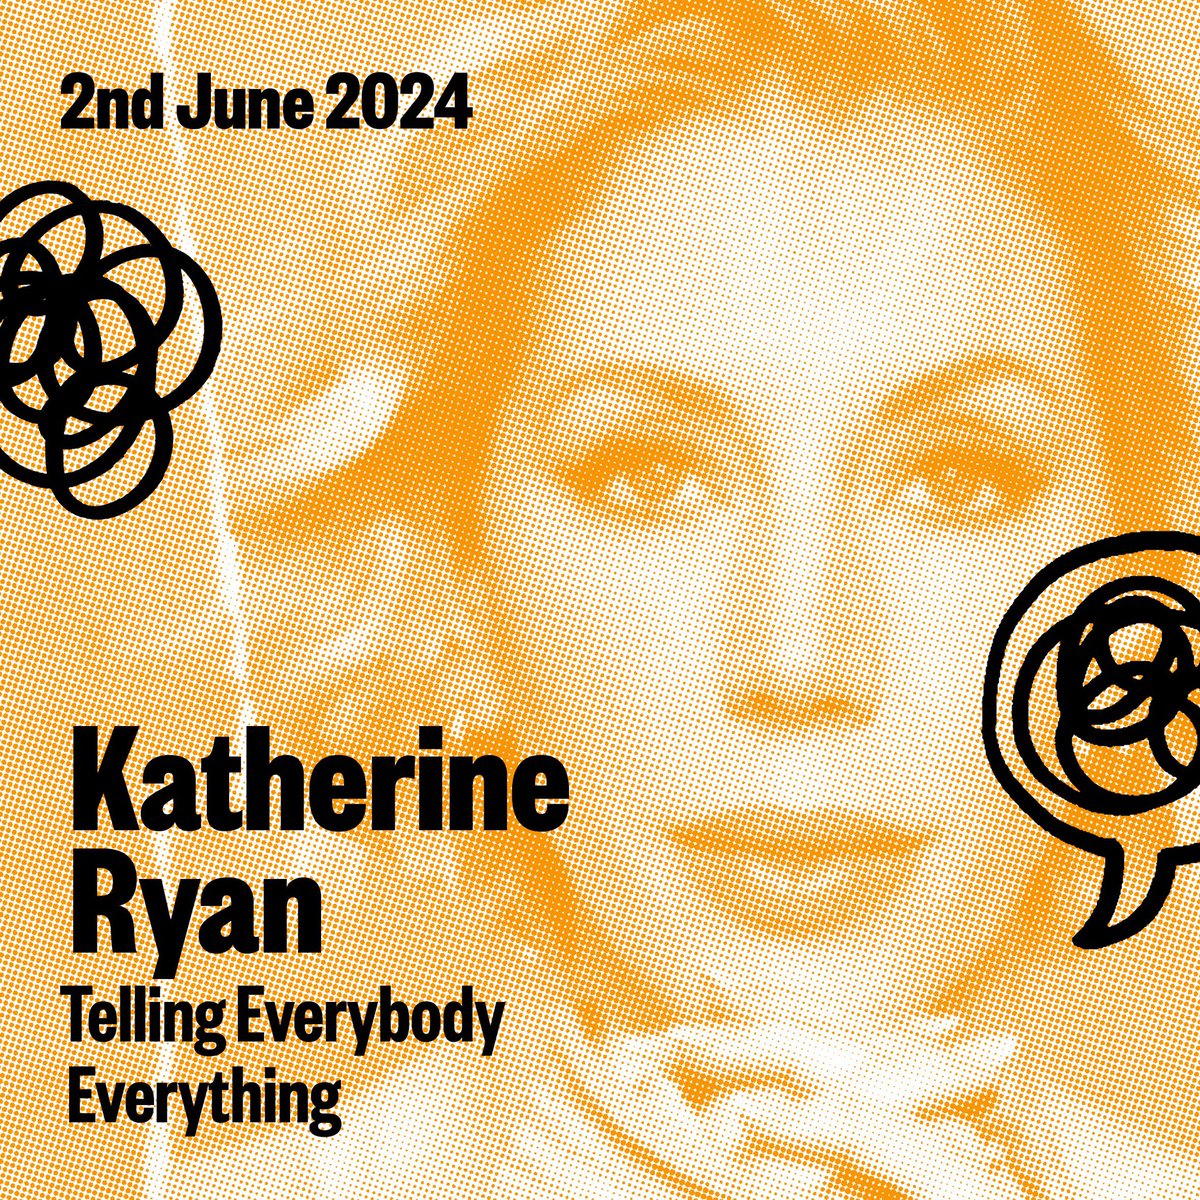 The Patron Saint of Real Talk, will live up to her podcast titles, Telling Everybody Everything, in a no-holds-barred night of eye-watering anecdotes, side-splitting stand-up, gold star guidance – and a special guest… Catch Katherine Ryan at Sheffield City Hall on 2nd June.